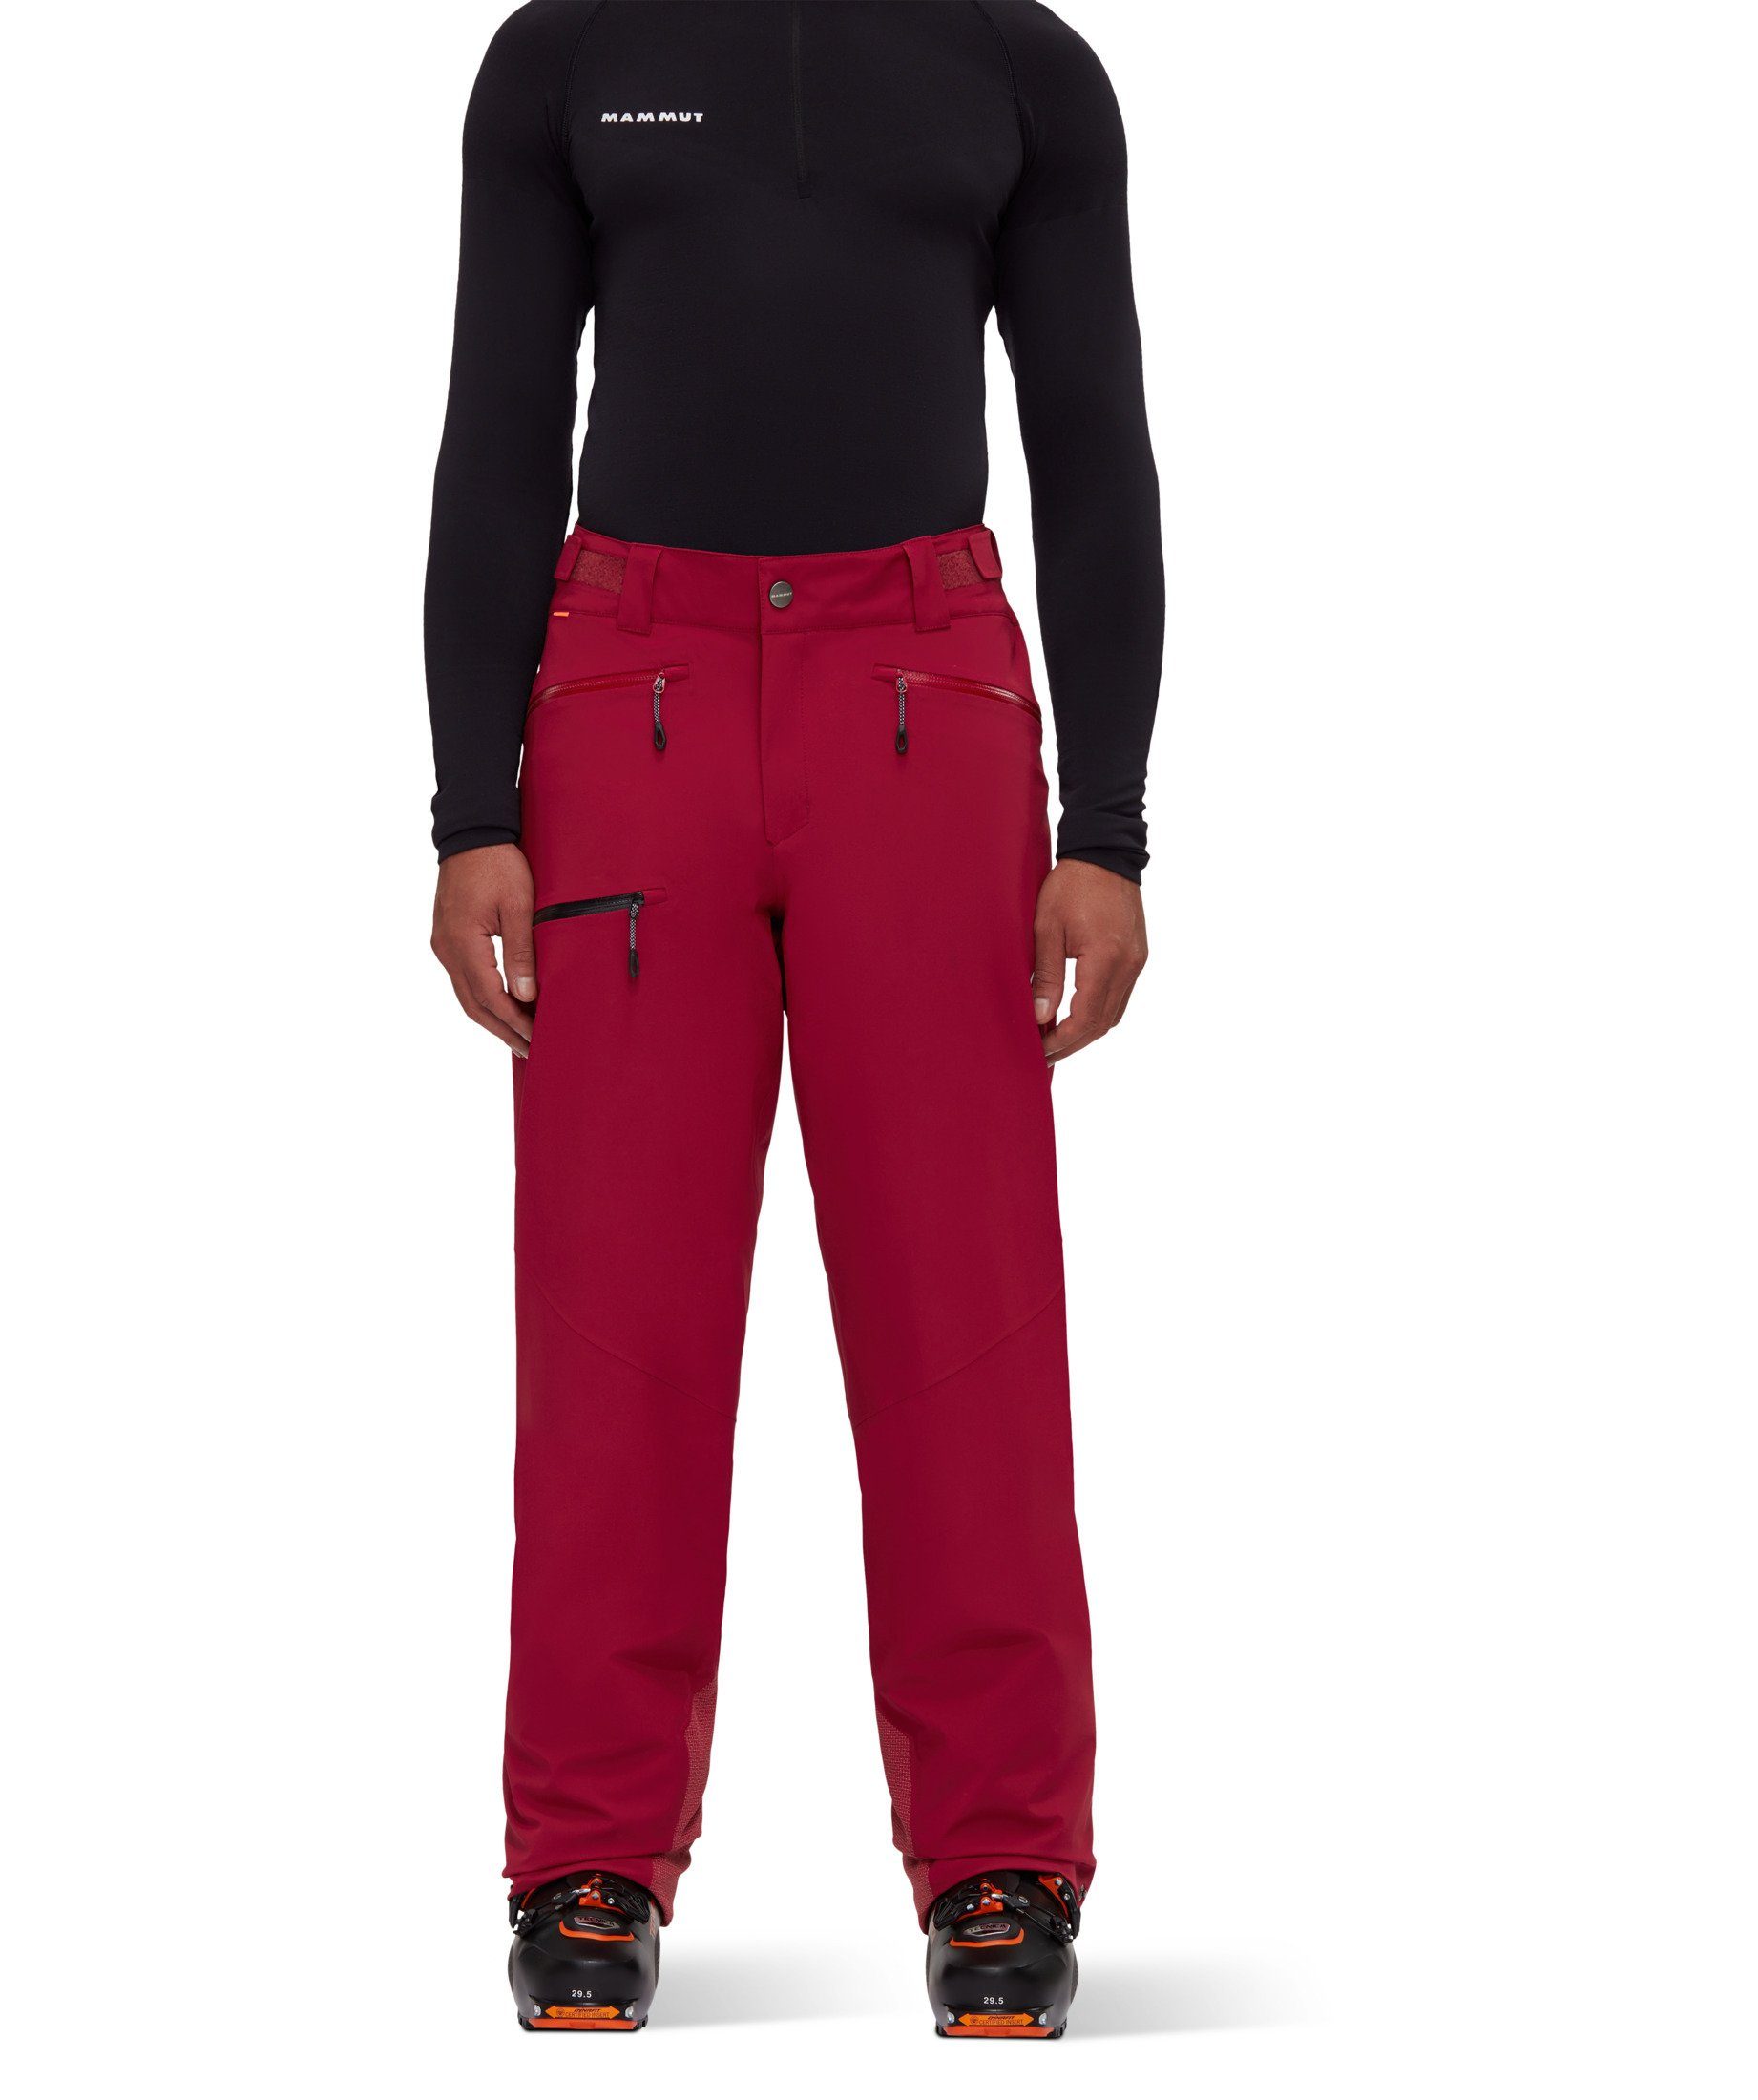 Mammut Skihose Stoney HS Thermo Men Pants blood red